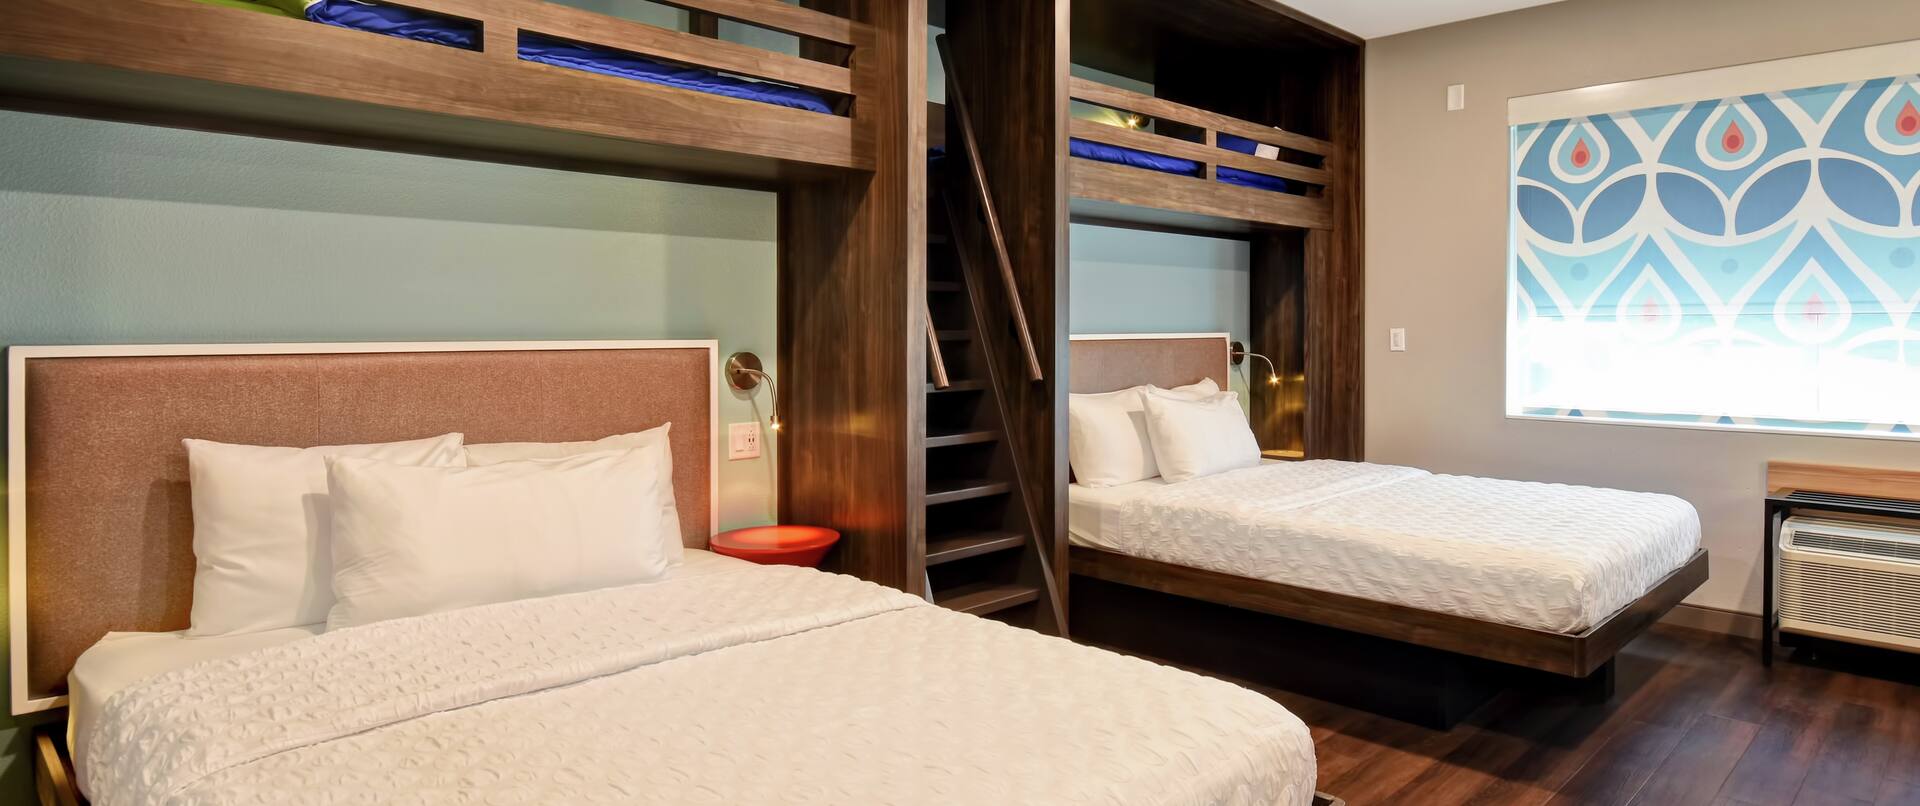 Two queen beds and two twin beds in a hotel room